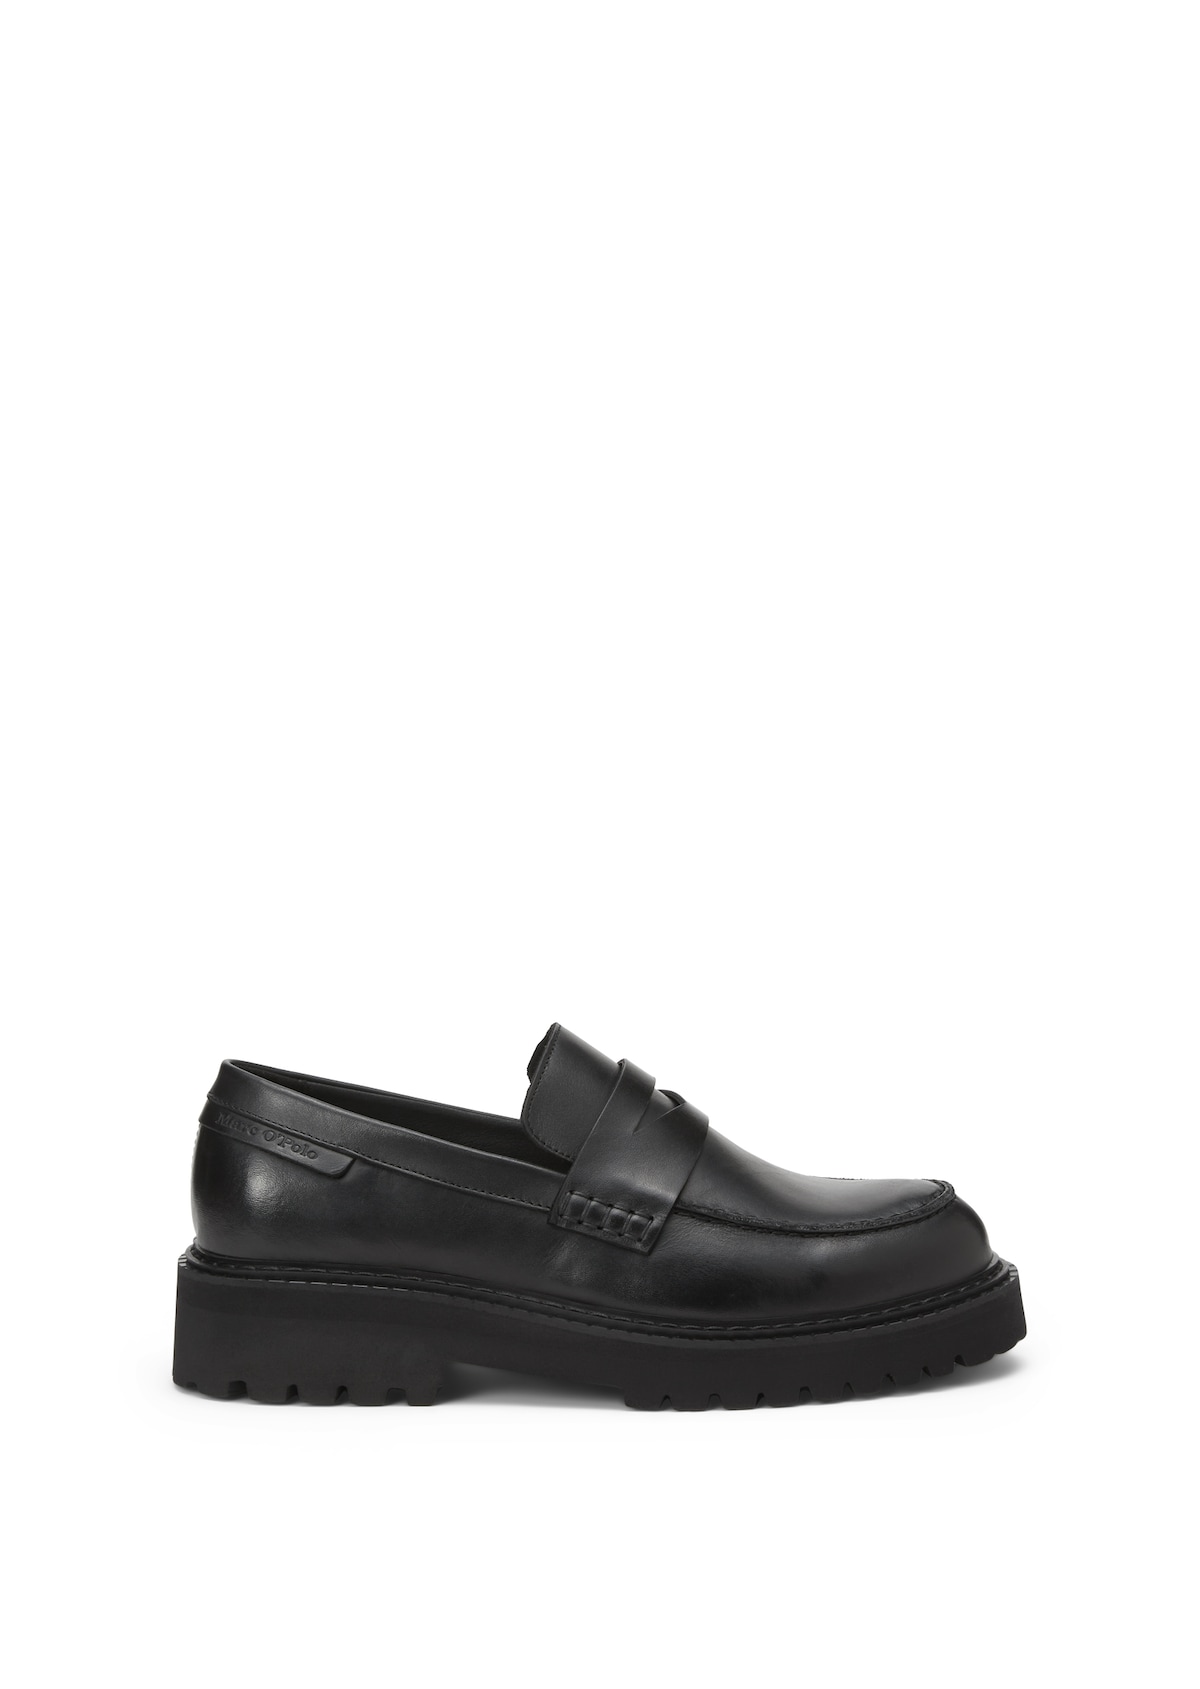 Penny loafers with a lightweight, treaded outsole - black | SHOES ...